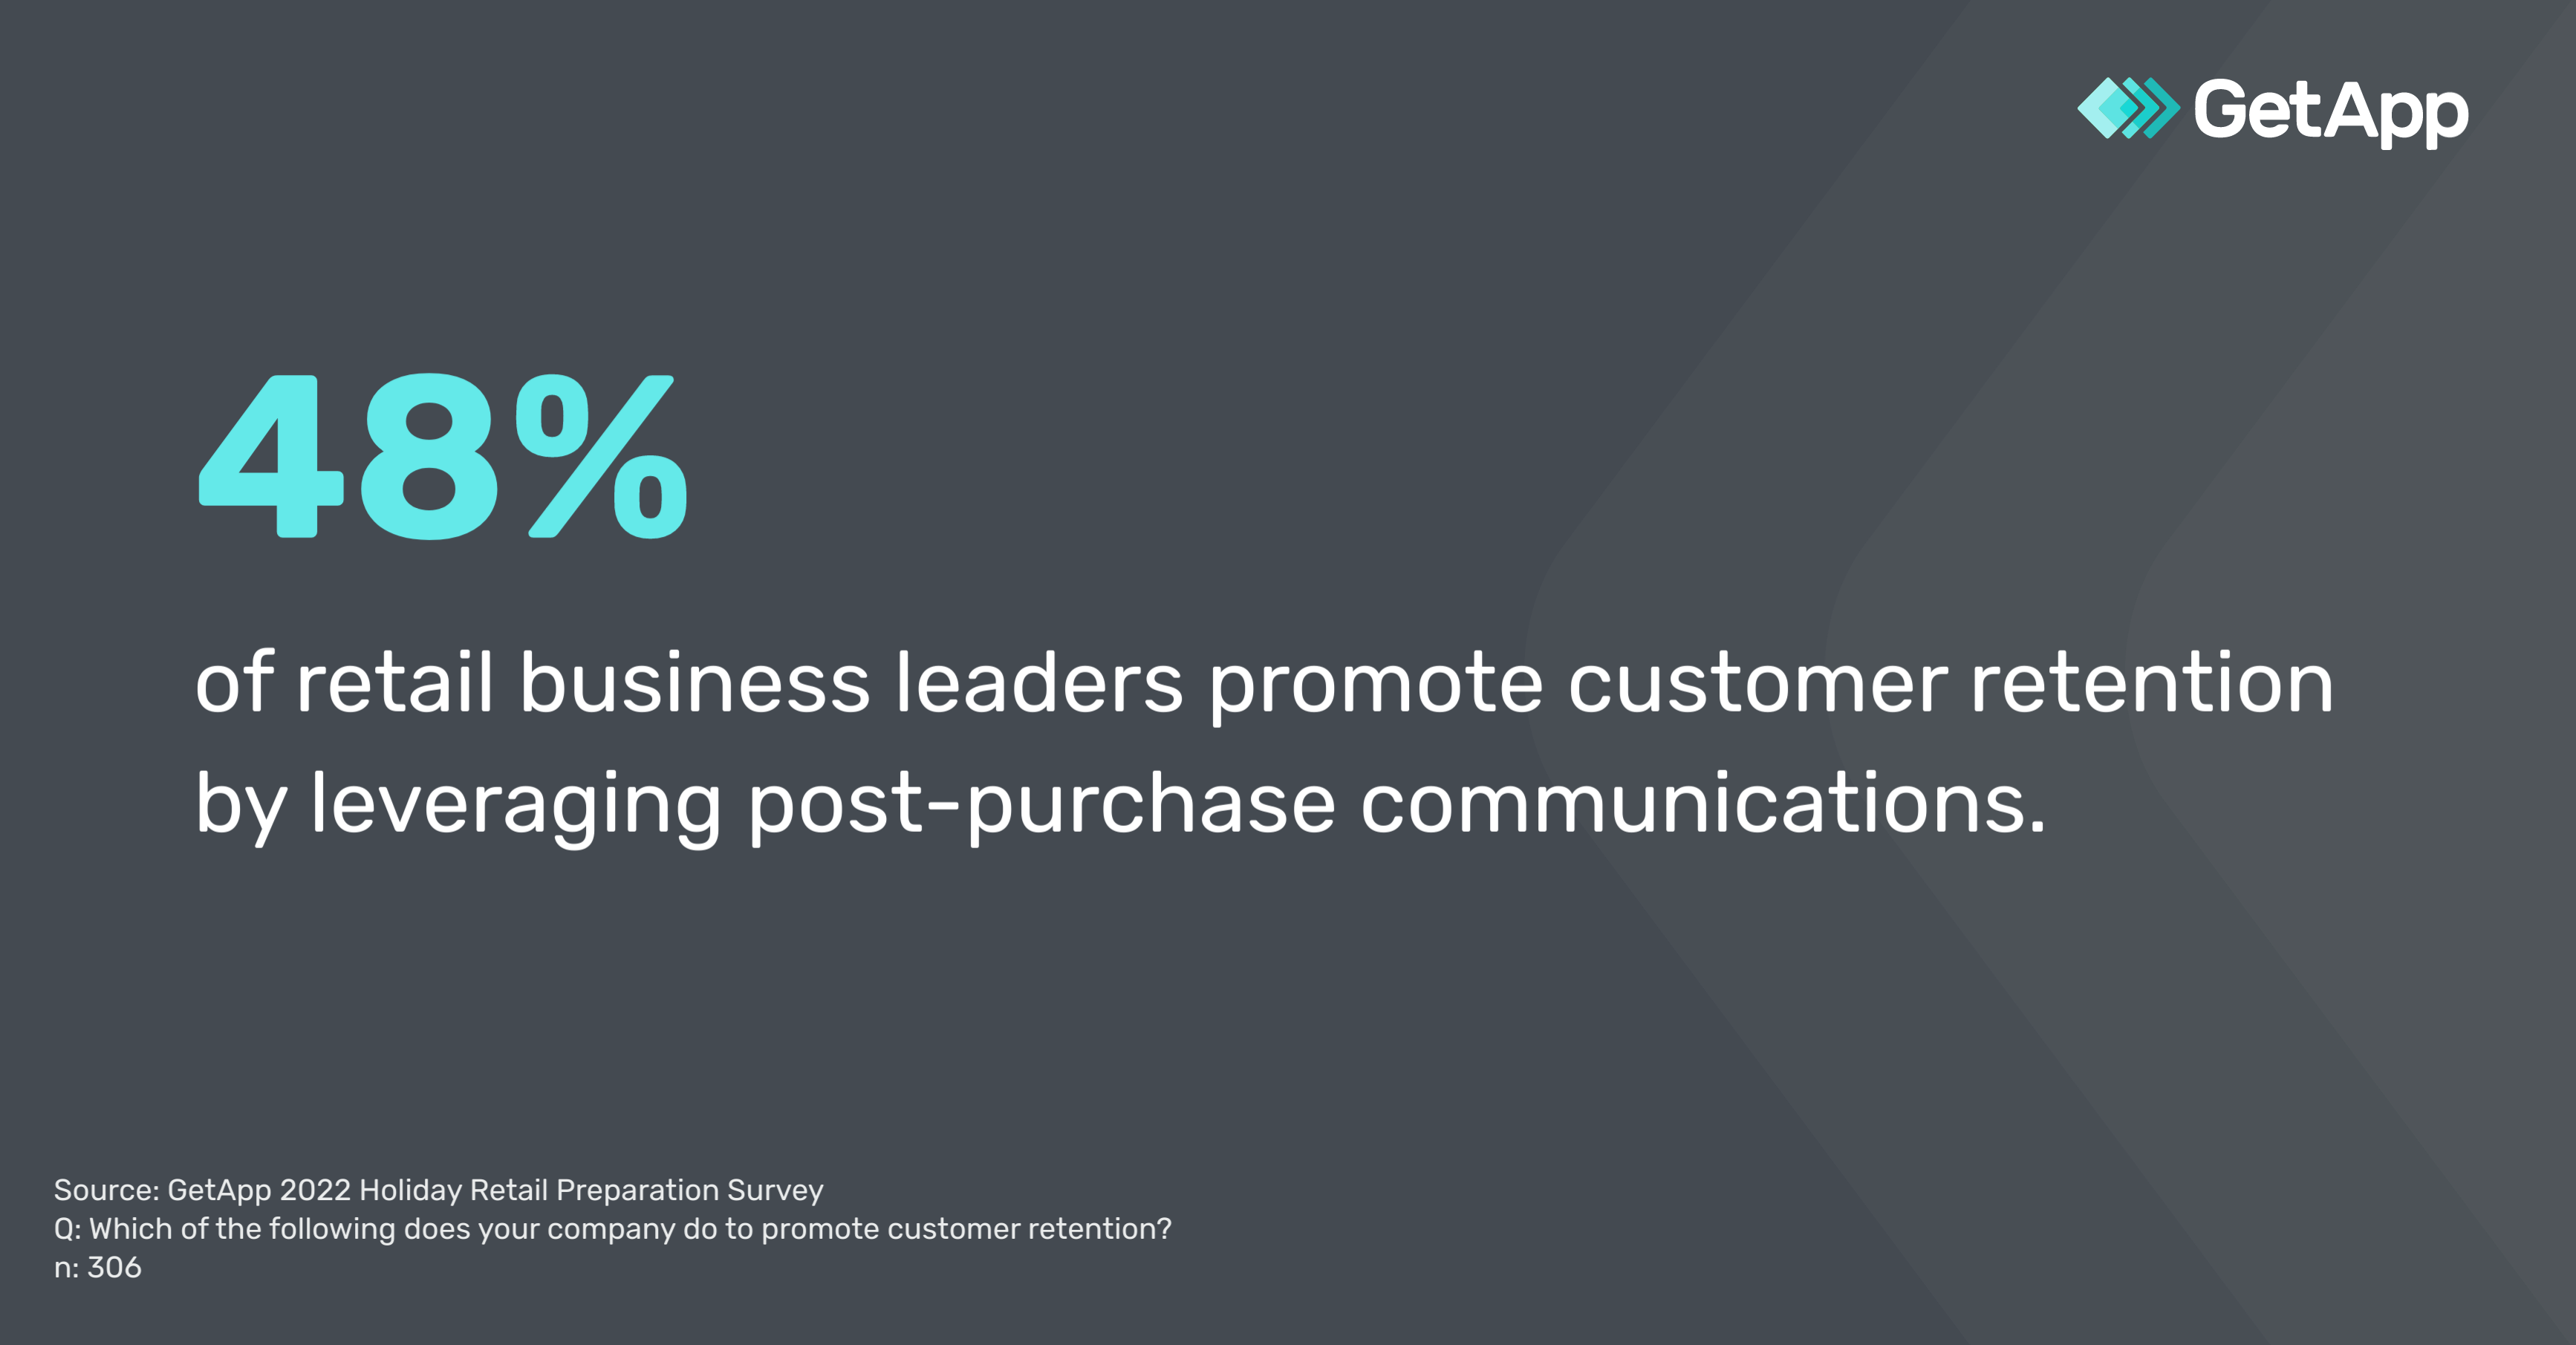 Forty-eight percent of retail business leaders promote customer retention by leveraging post-purchase communications